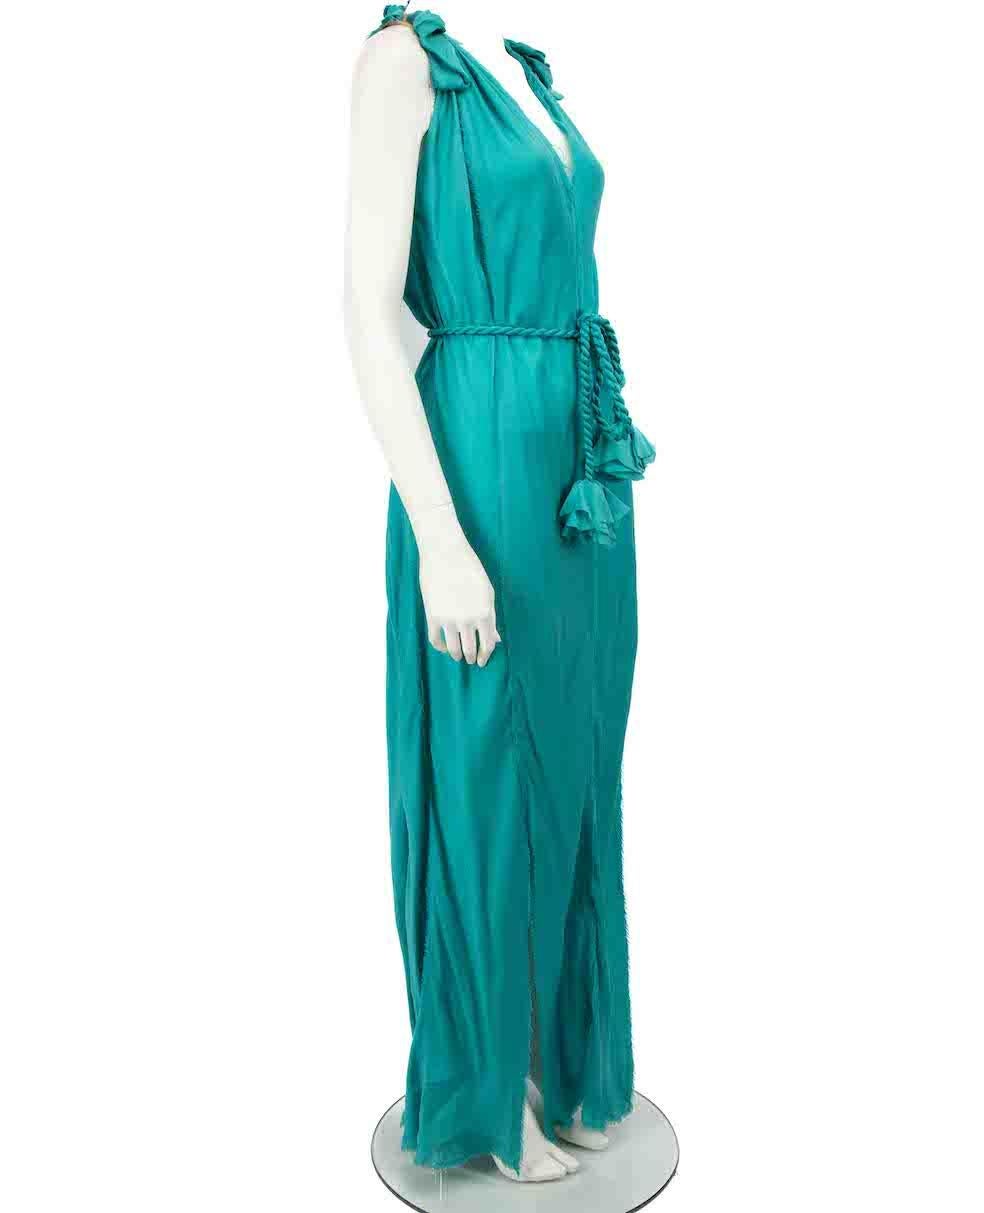 CONDITION is Very good. Minimal wear to dress is evident. Minimal loose thread to side slits on skirt and front right hemline. A stain line is visible centre front on this used Lanvin designer resale item.
 
 Details
 Turquoise
 Silk
 Dress
 Maxi
